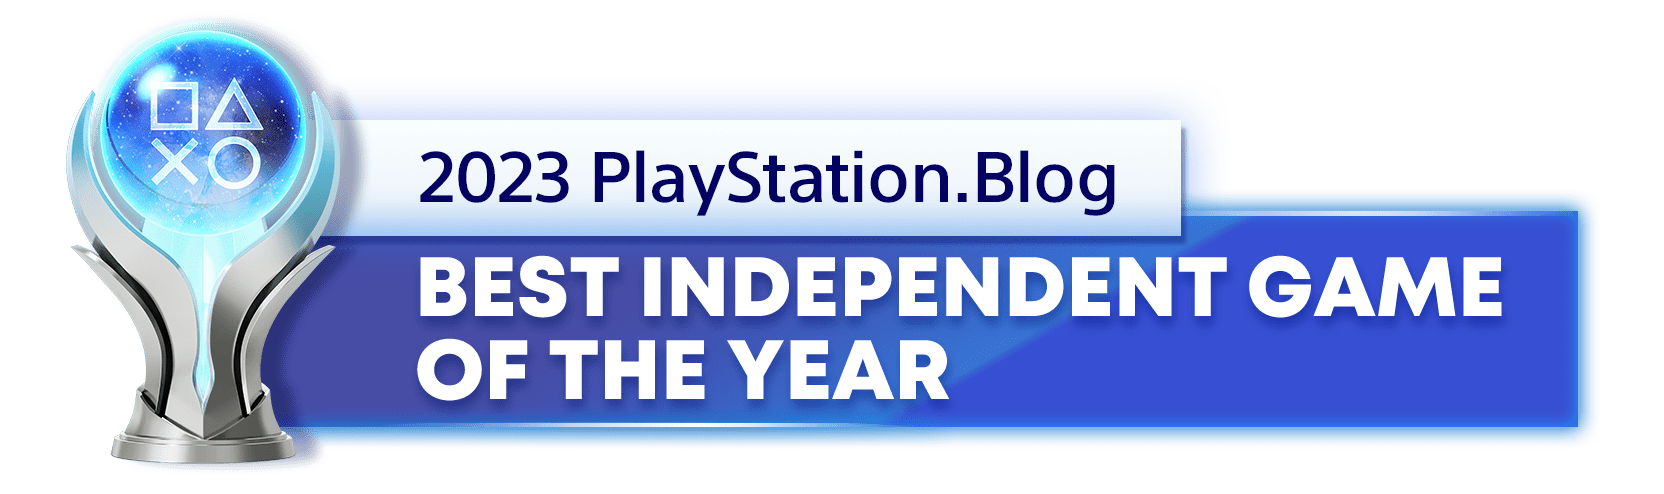 Platinum Trophy for the 2023 PlayStation Blog Best Independent Game of the Year Winner